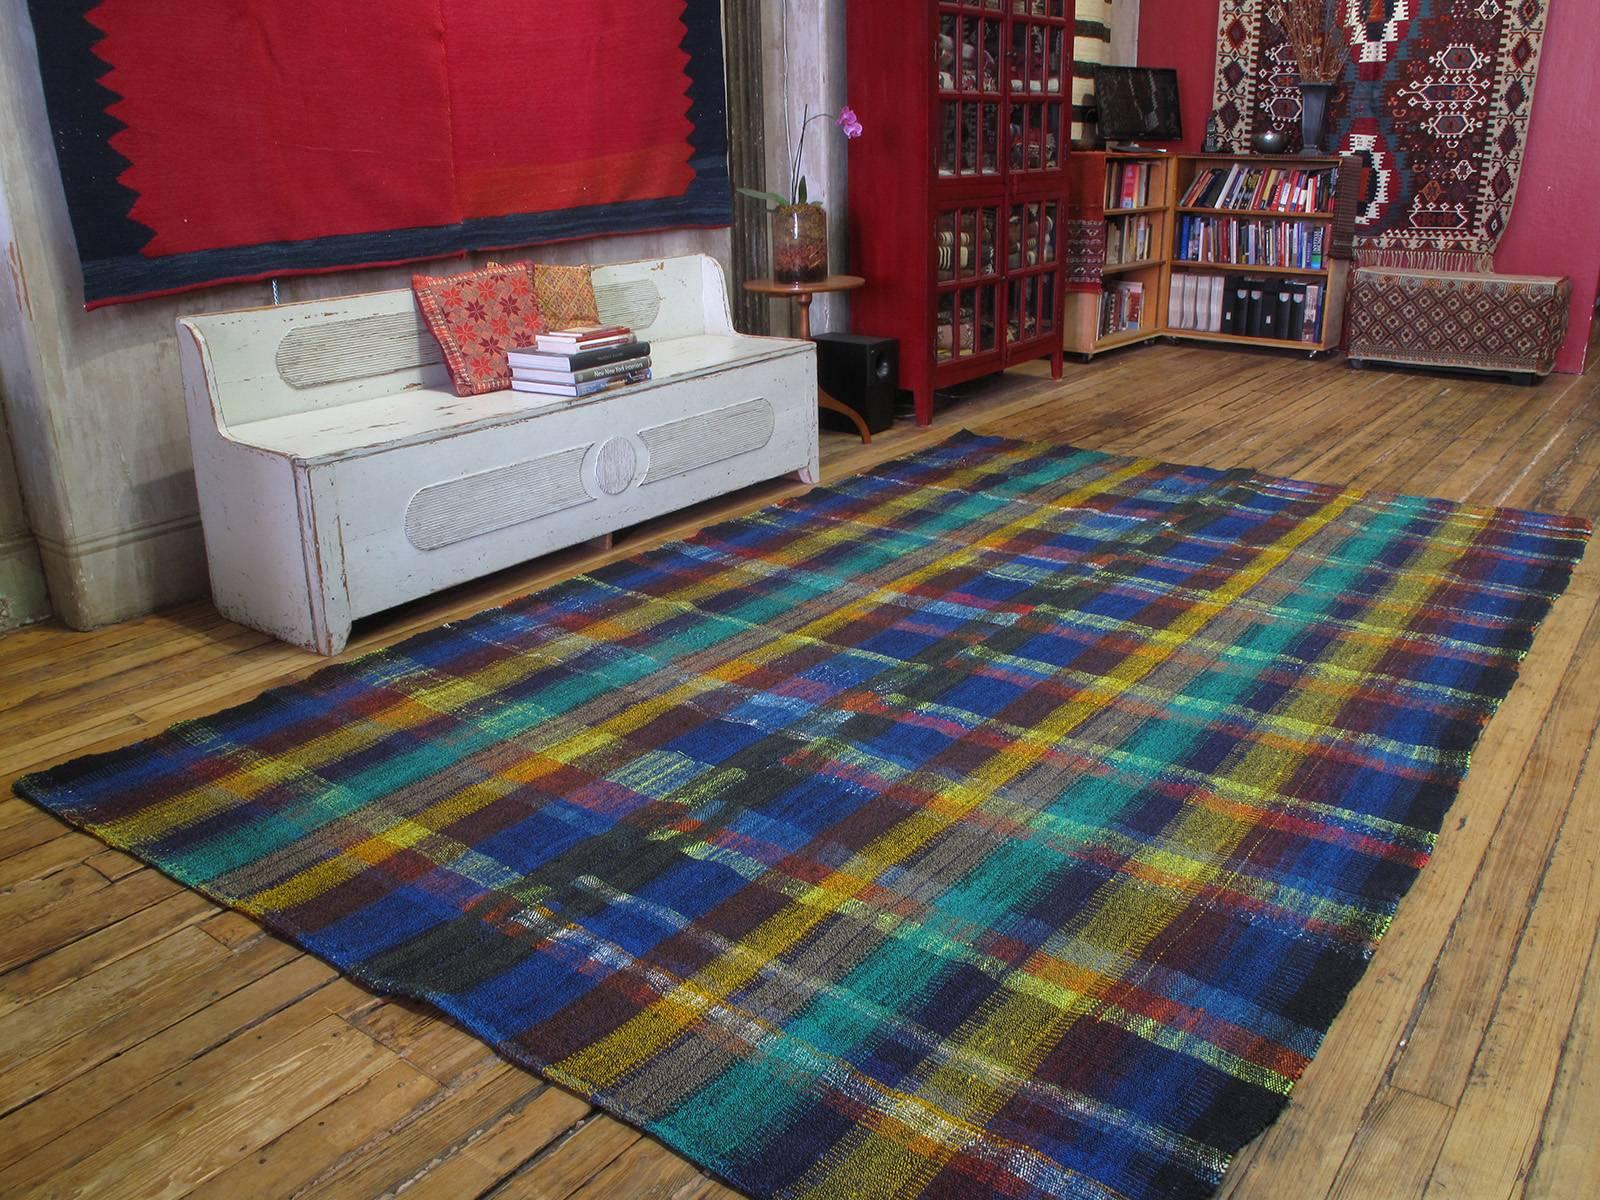 Not for the faint of heart! An old flat-weave from Central Turkey, woven with an ingenious mixture of colorful cotton rag and goat hair, creating a sturdy floor cover for everyday use. We have handled many of these over the years - this is certainly